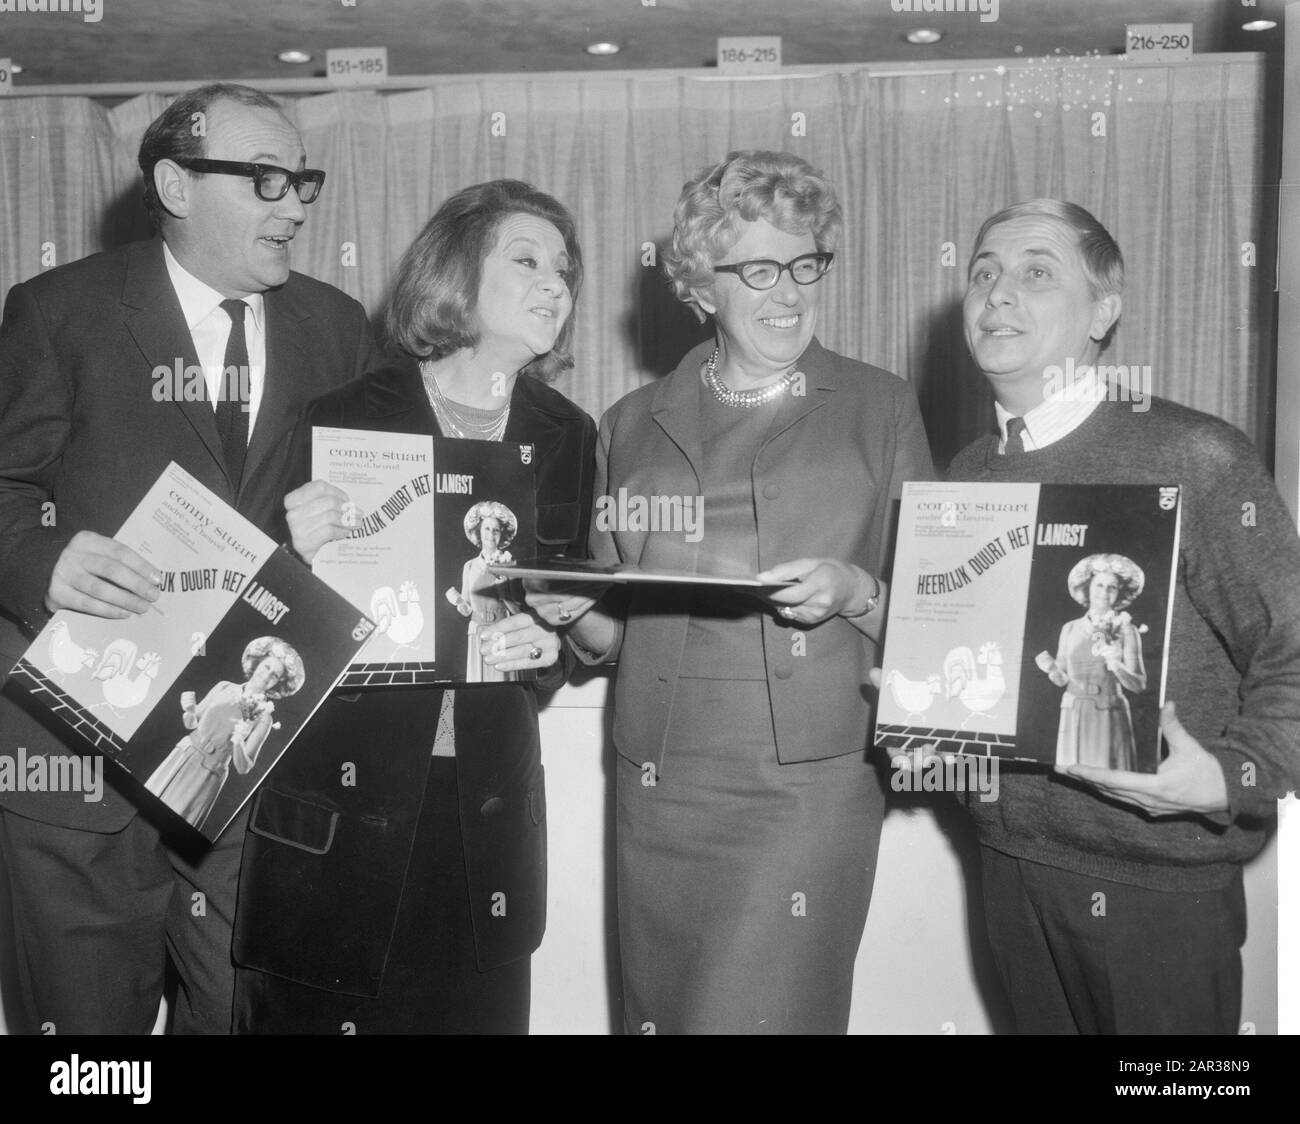 Long playing record of the musical 'Delicious lasts the longest 'by Annie M.G. Schmidt and Harry Bannink awarded to the employees: v.l.n.r.: André van den Heuvel, Conny Stuart, Annie M.G. Schmidt and Leen Jongewaardt Date: 30 November 1965 Keywords: actors, long play records, musicals, music, writers Personal name: Heuvel, Aad van den, Heuvel, André van den, Jongewaard, Leen, Schmidt, Annie M.G., Stuart, Conny Stock Photo